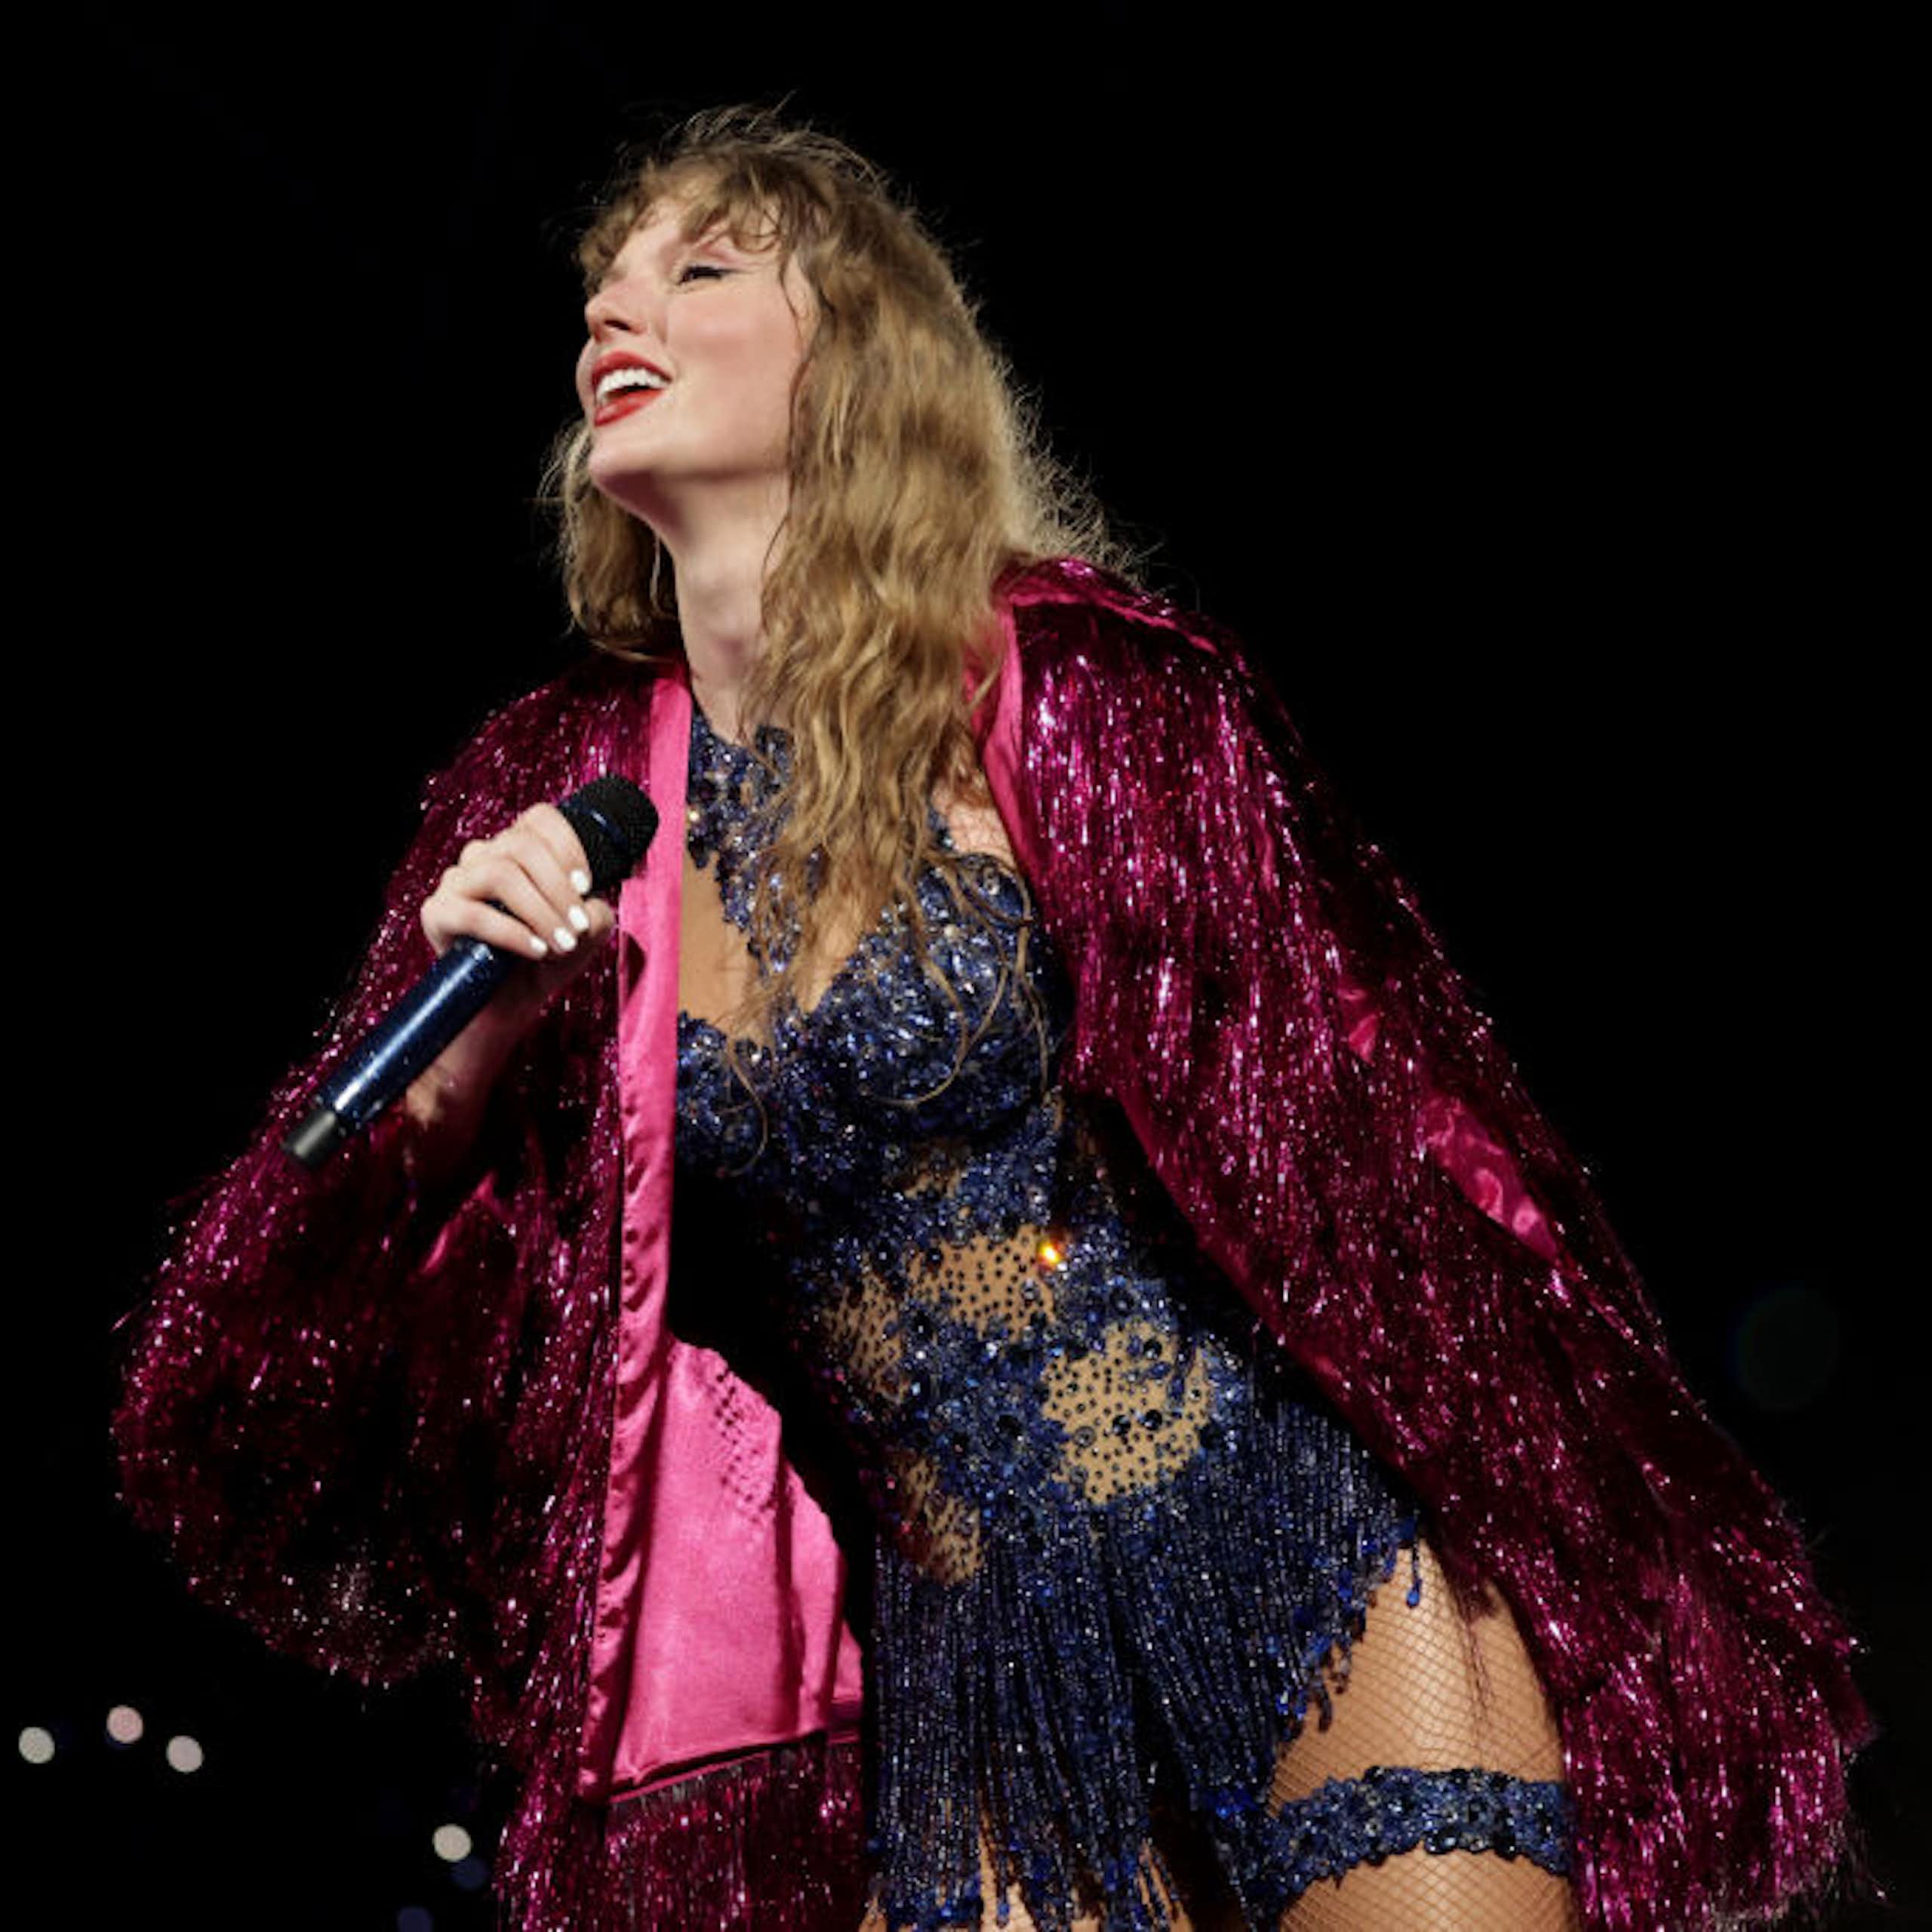 A blond woman smiles as she sings in a sparkly purple robe and blue bodysuit.